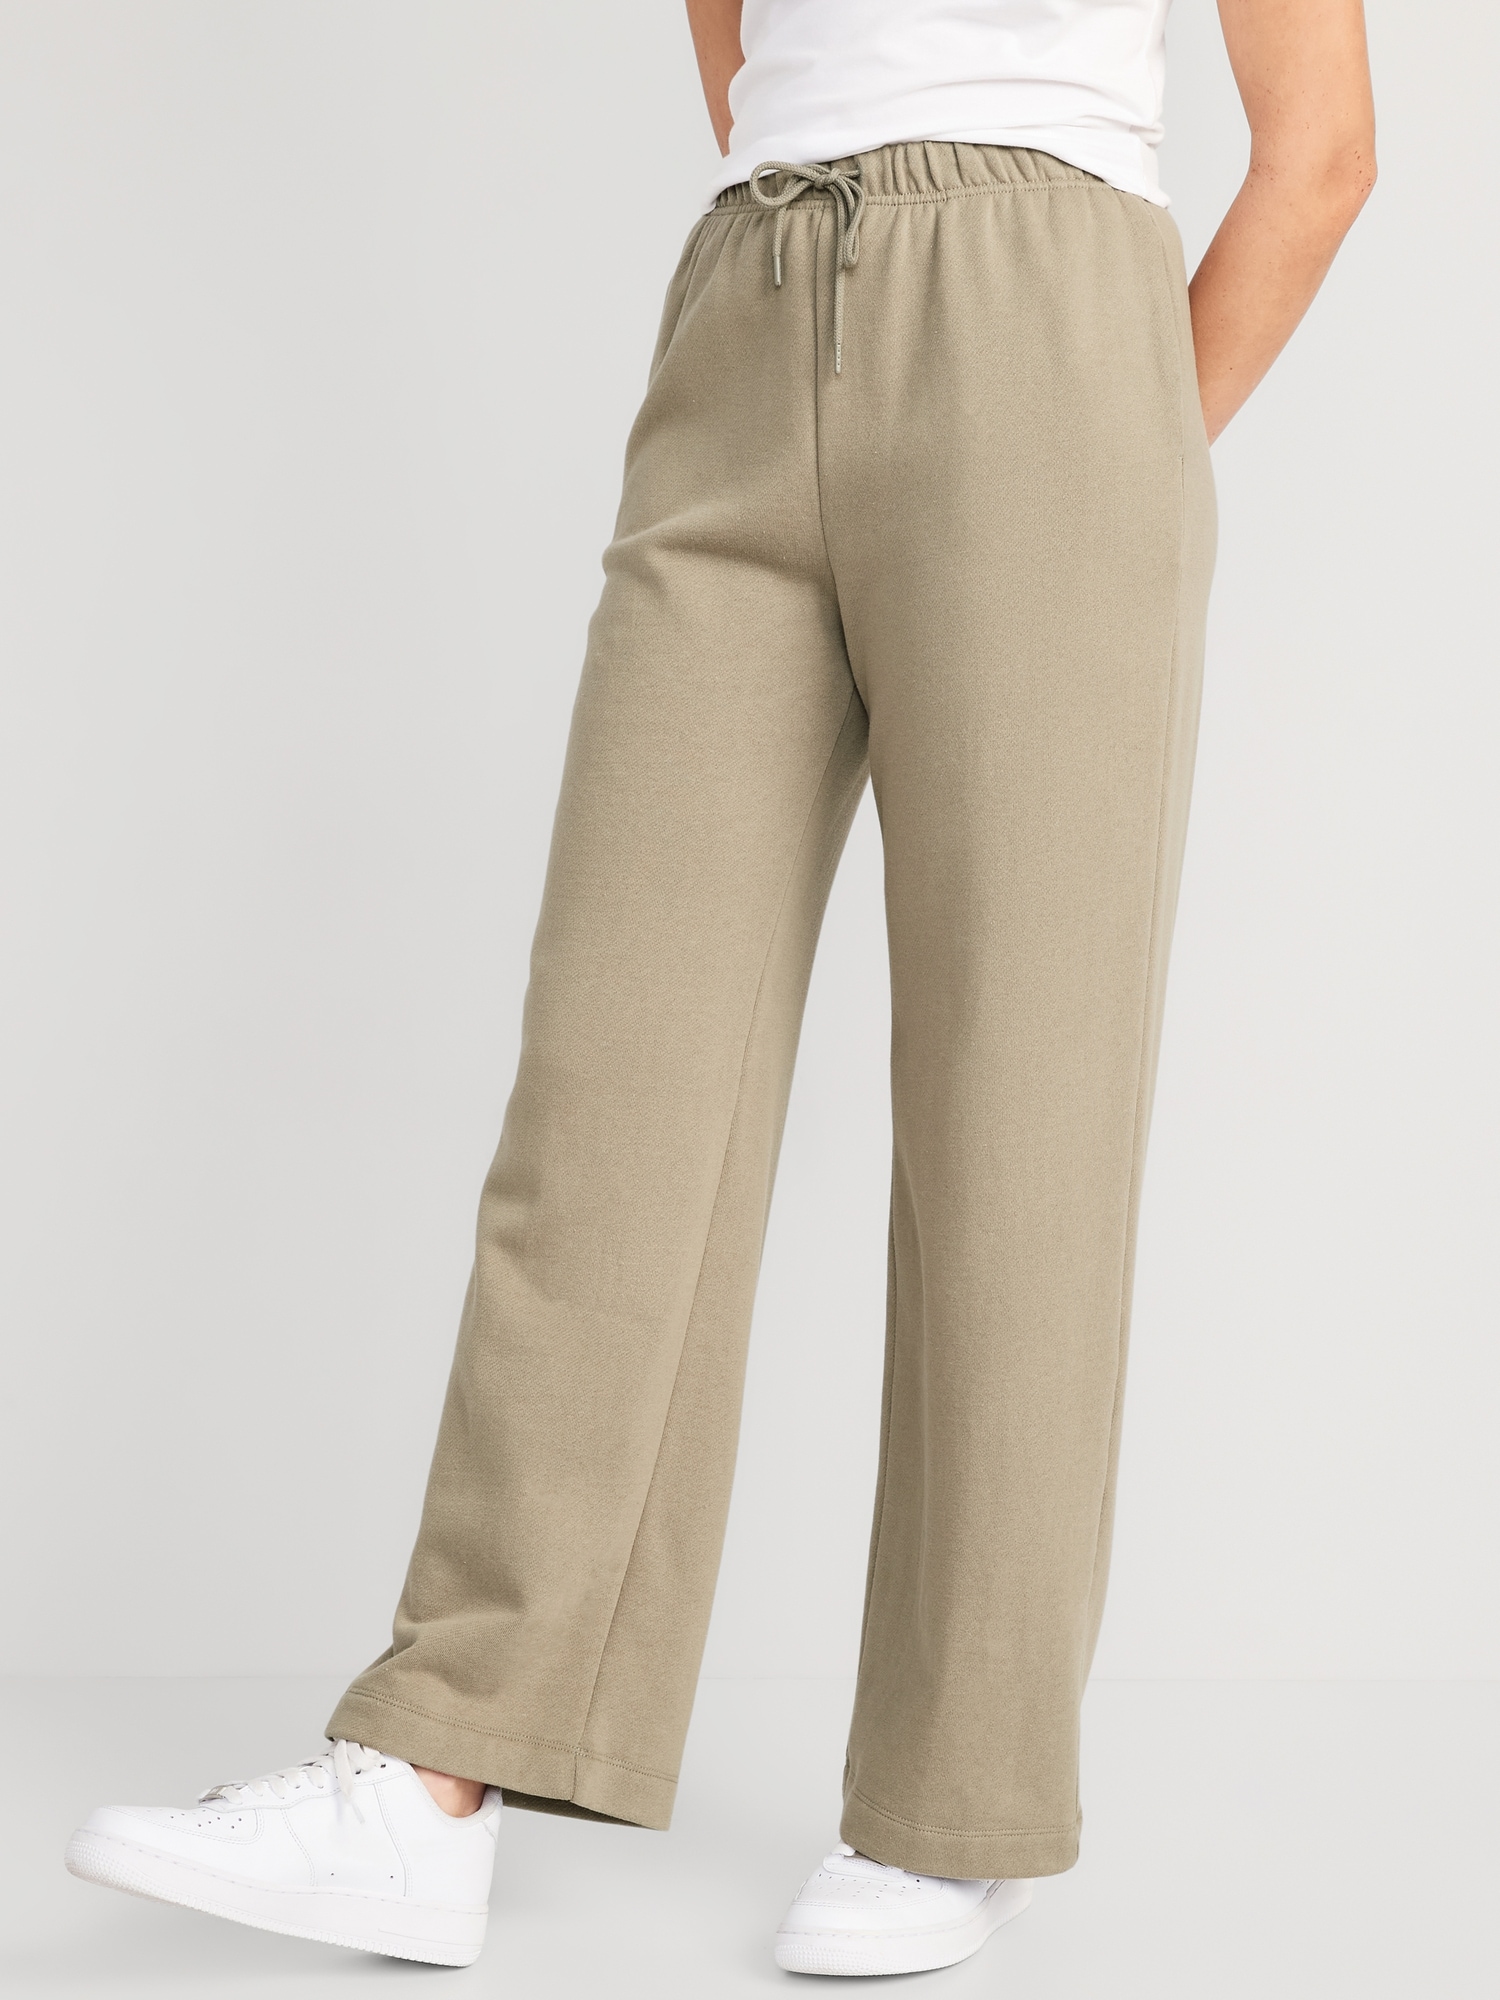 Old Navy Extra High-Waisted Vintage Straight Lounge Sweatpants for Women